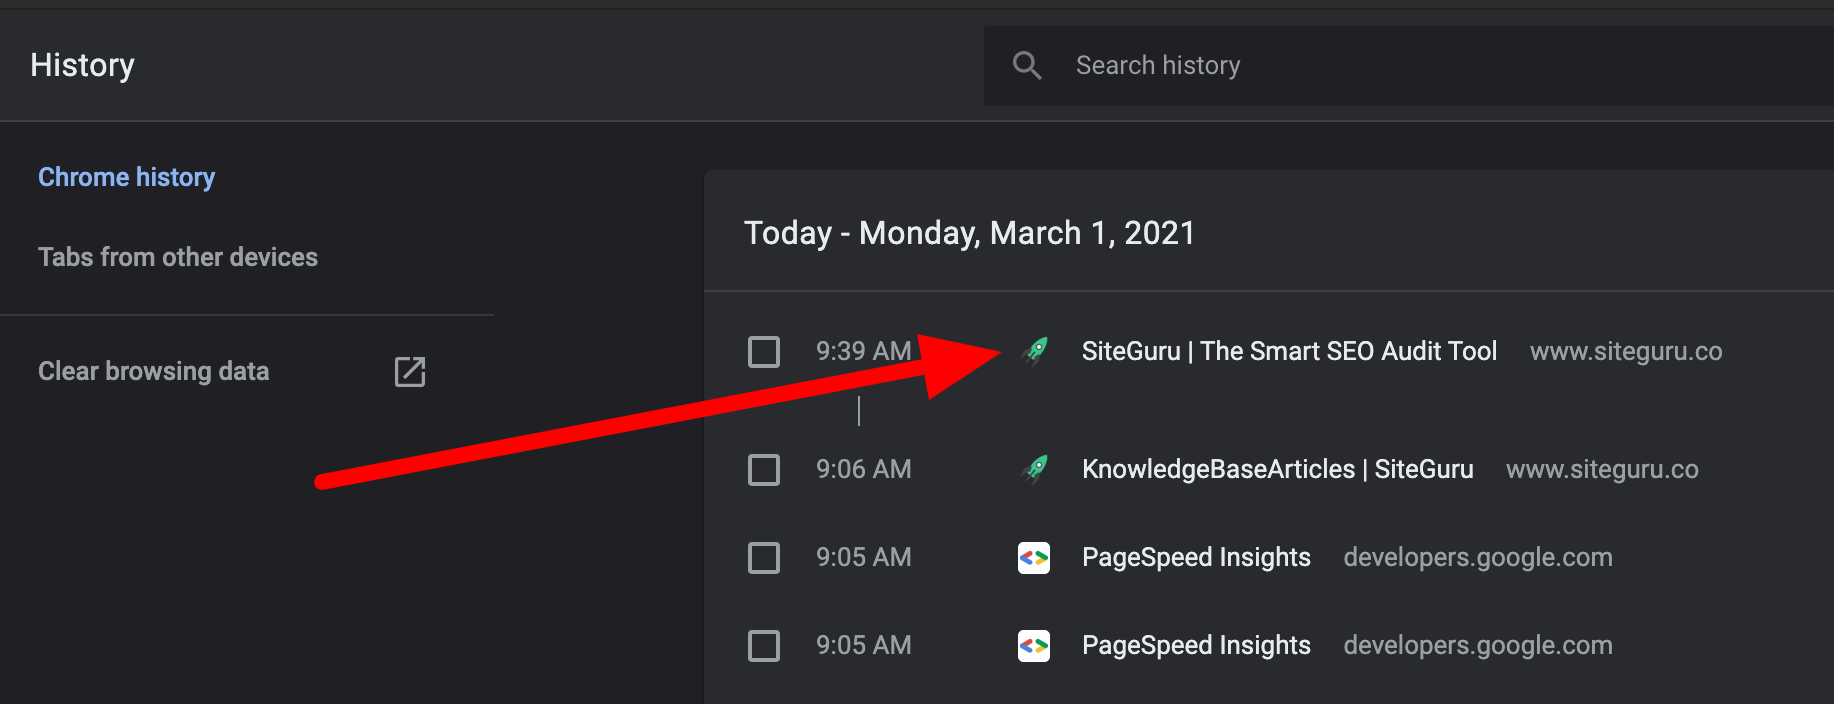 favicon in the history settings on chrome browser